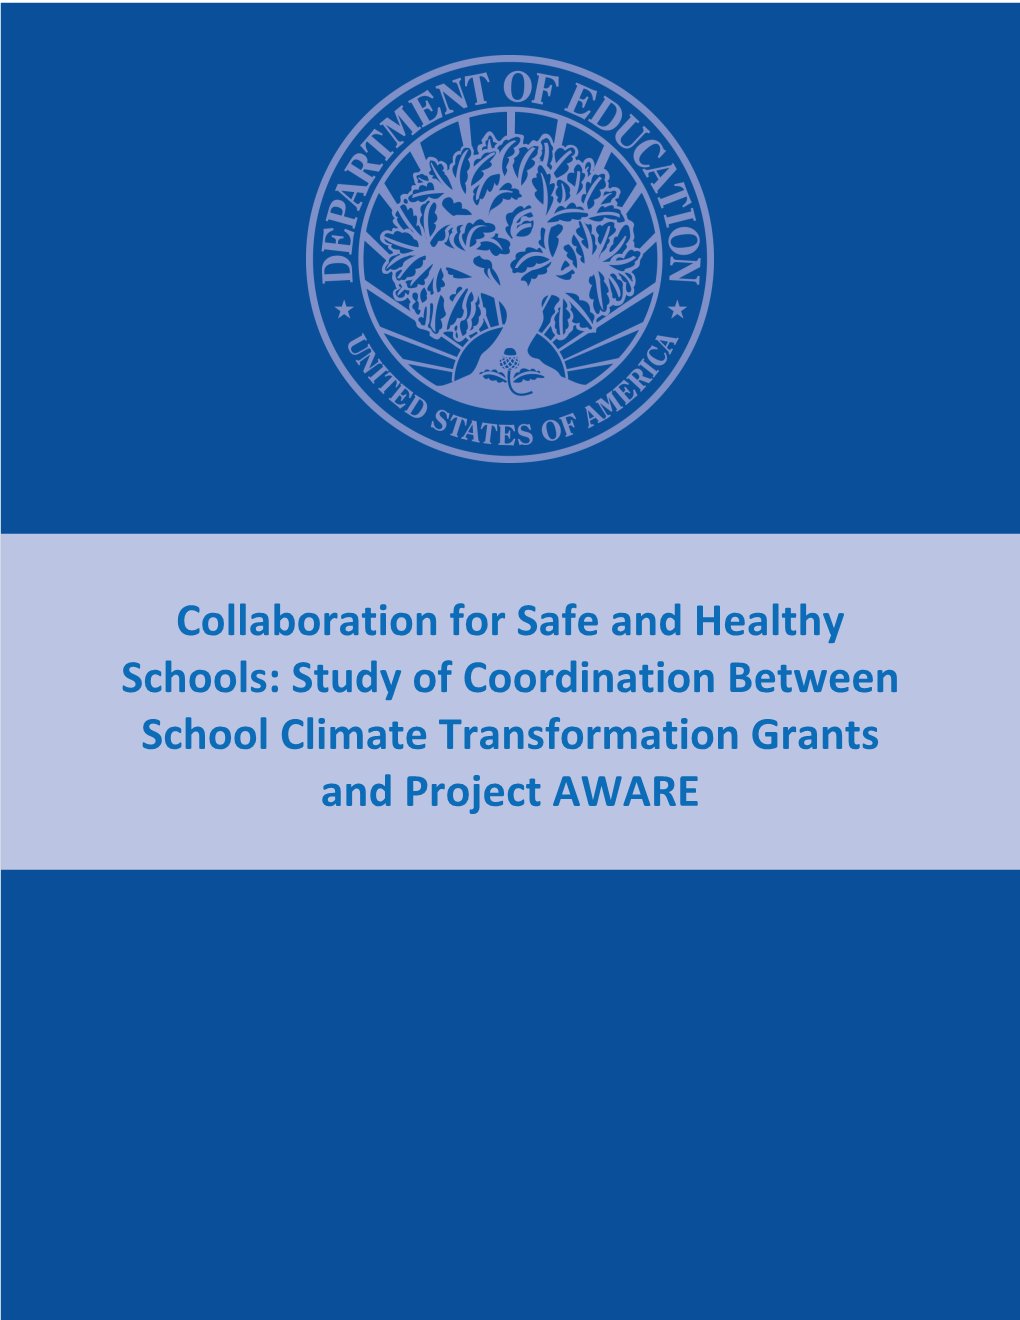 Collaboration for Safe and Healthy Schools: Study of Coordination Between School Climate Transformation Grants and Project AWARE